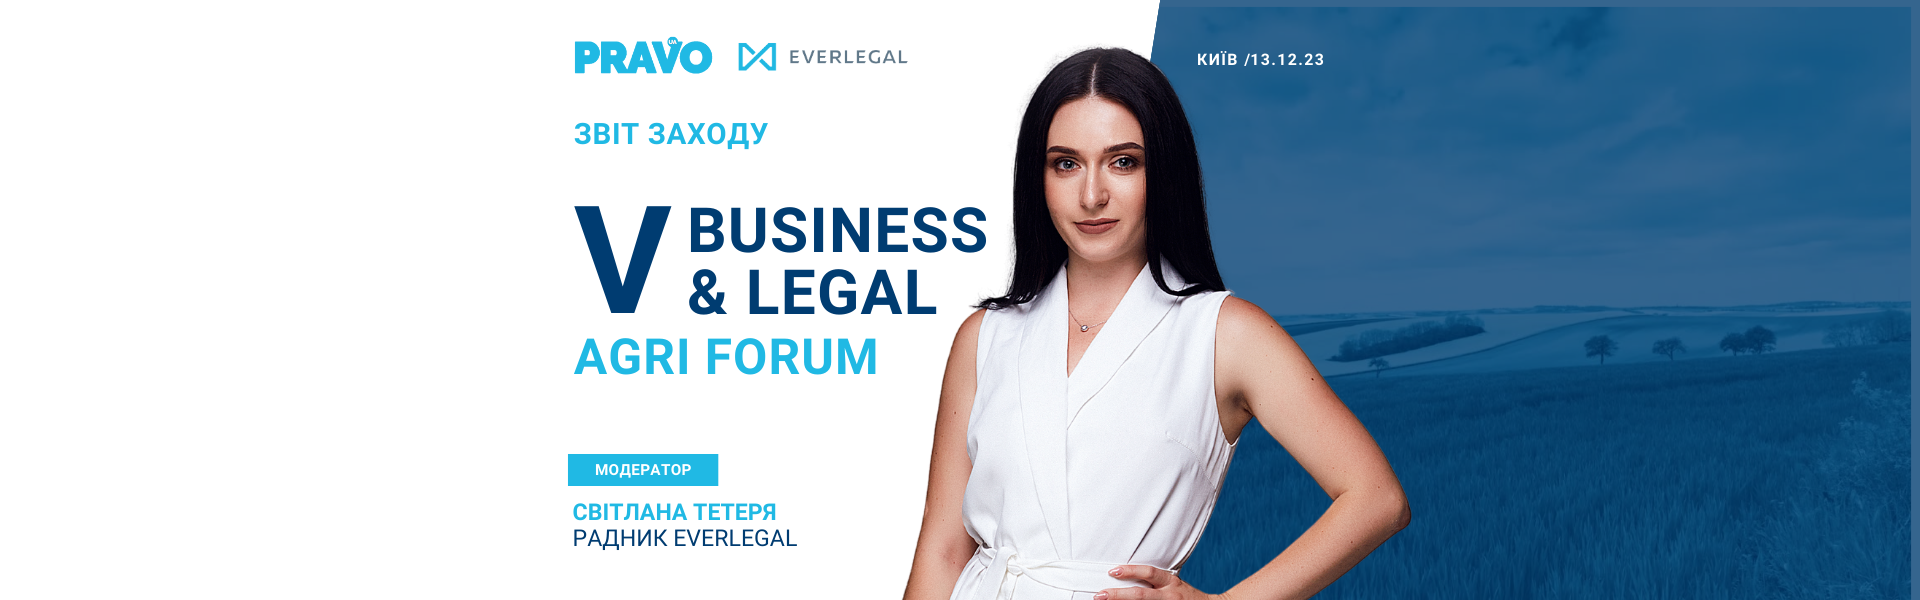 Counsel at EVERLEGAL moderated a session at the V Business & Legal Agri Forum